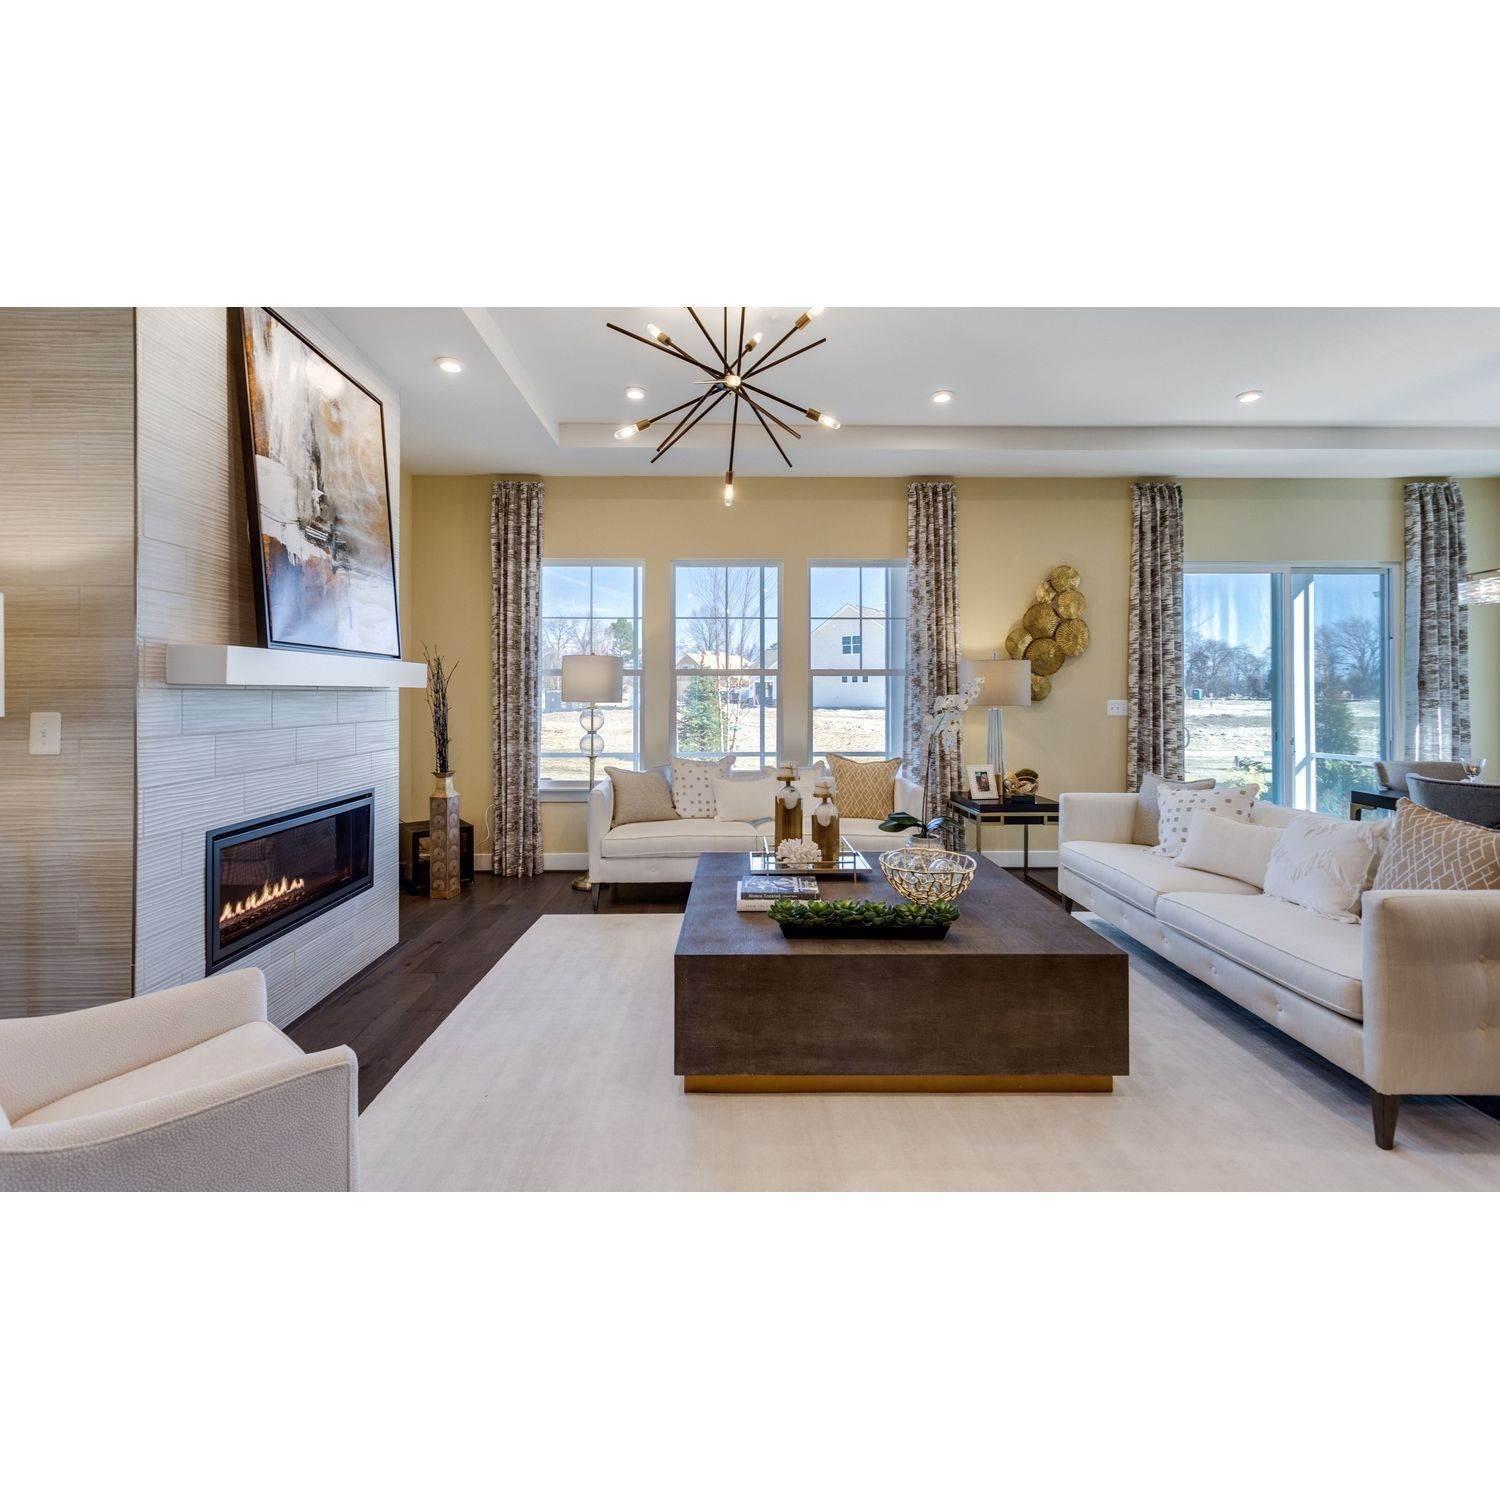 13. Single Family for Sale at K. Hovnanian's® Four Seasons At Kent Island - Sing 203 Bayberry Drive, Chester, MD 21619